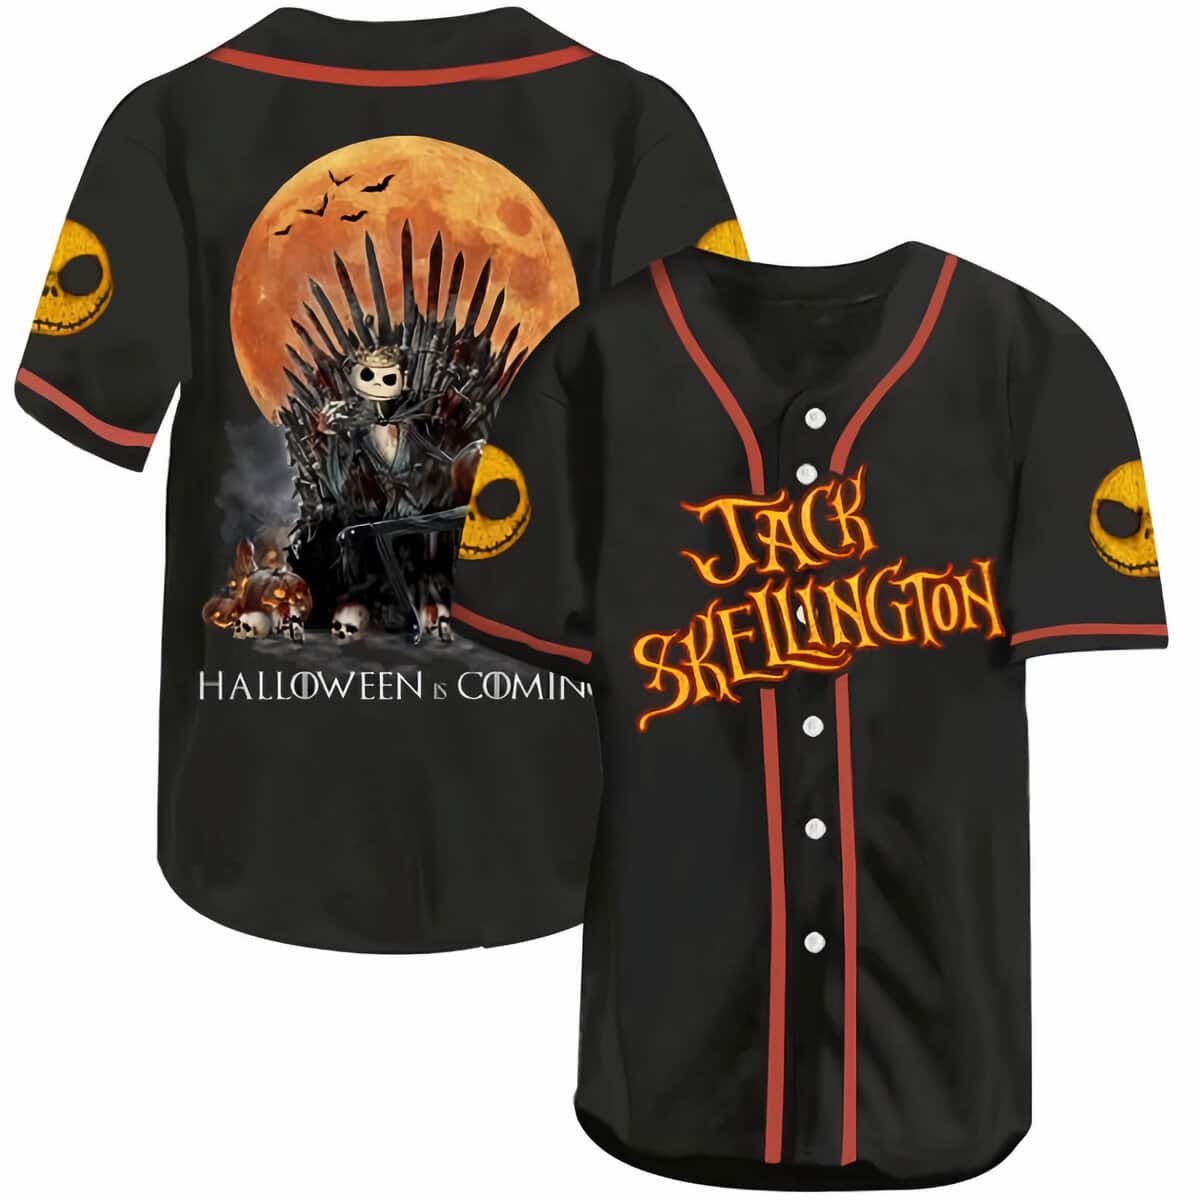 Jack Skellington Baseball Jersey Halloween Is Coming The Nightmare Before Christmas Gift For Brother